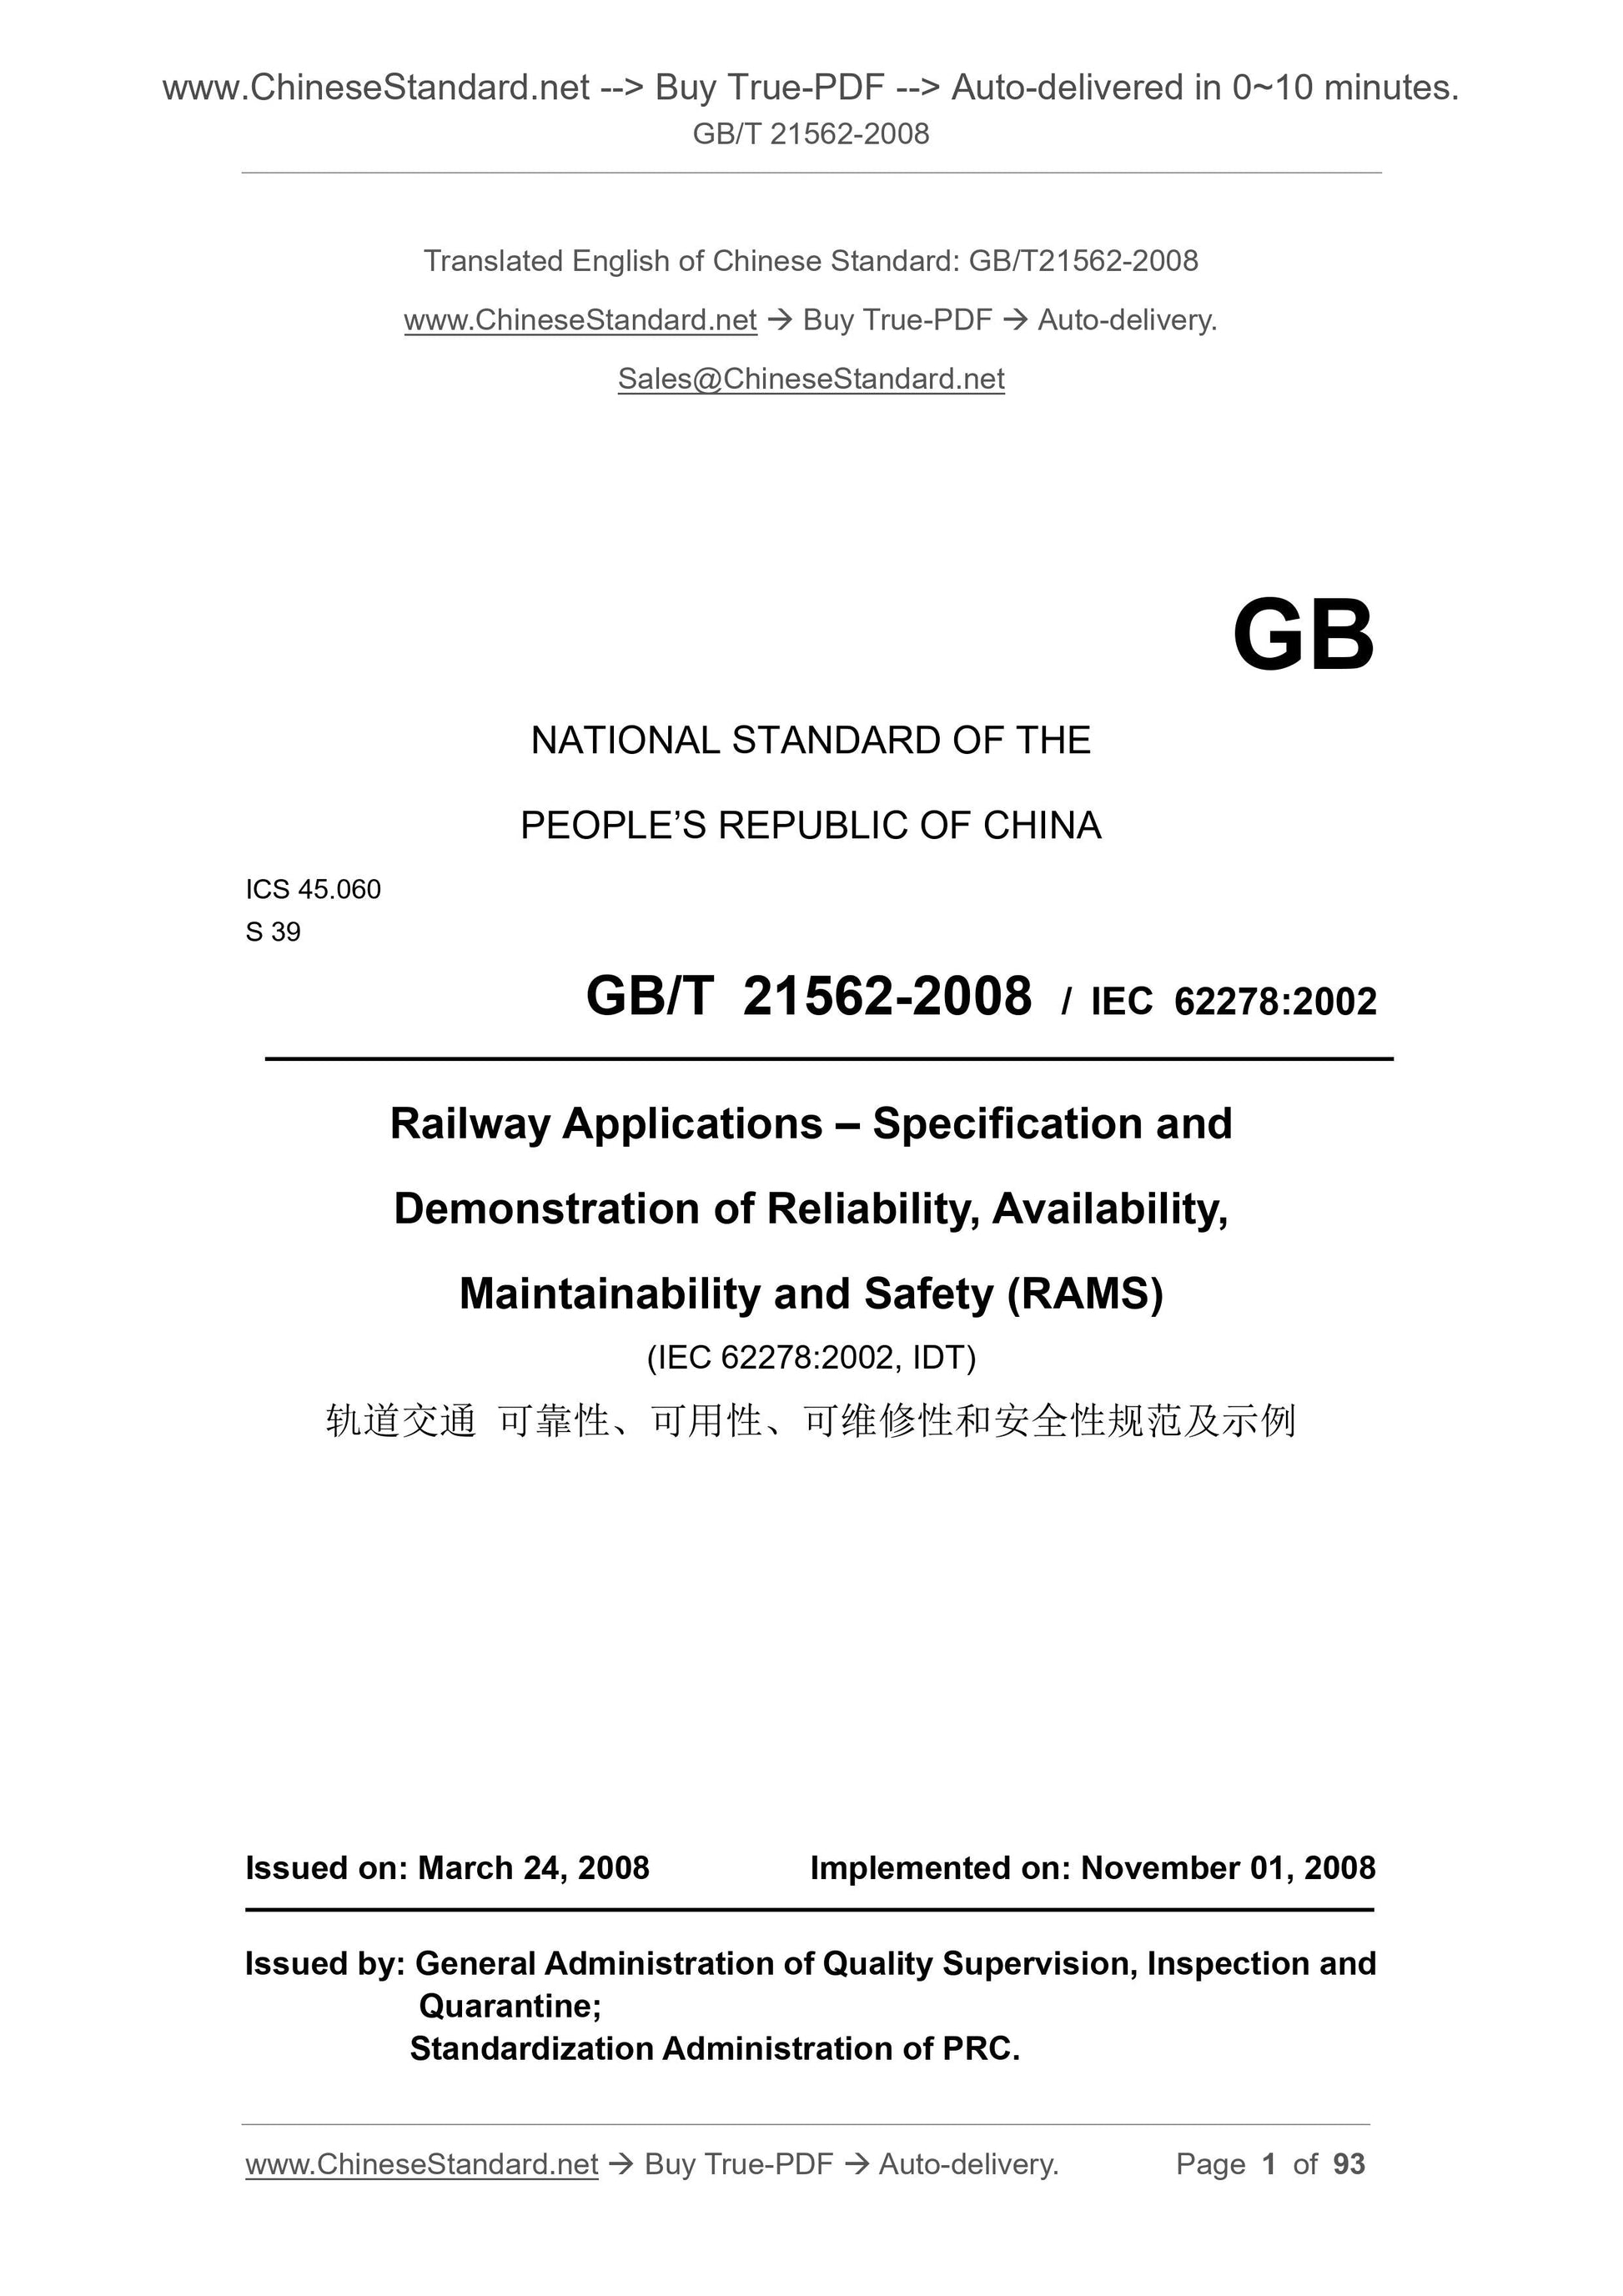 GB/T 21562-2008 Page 1